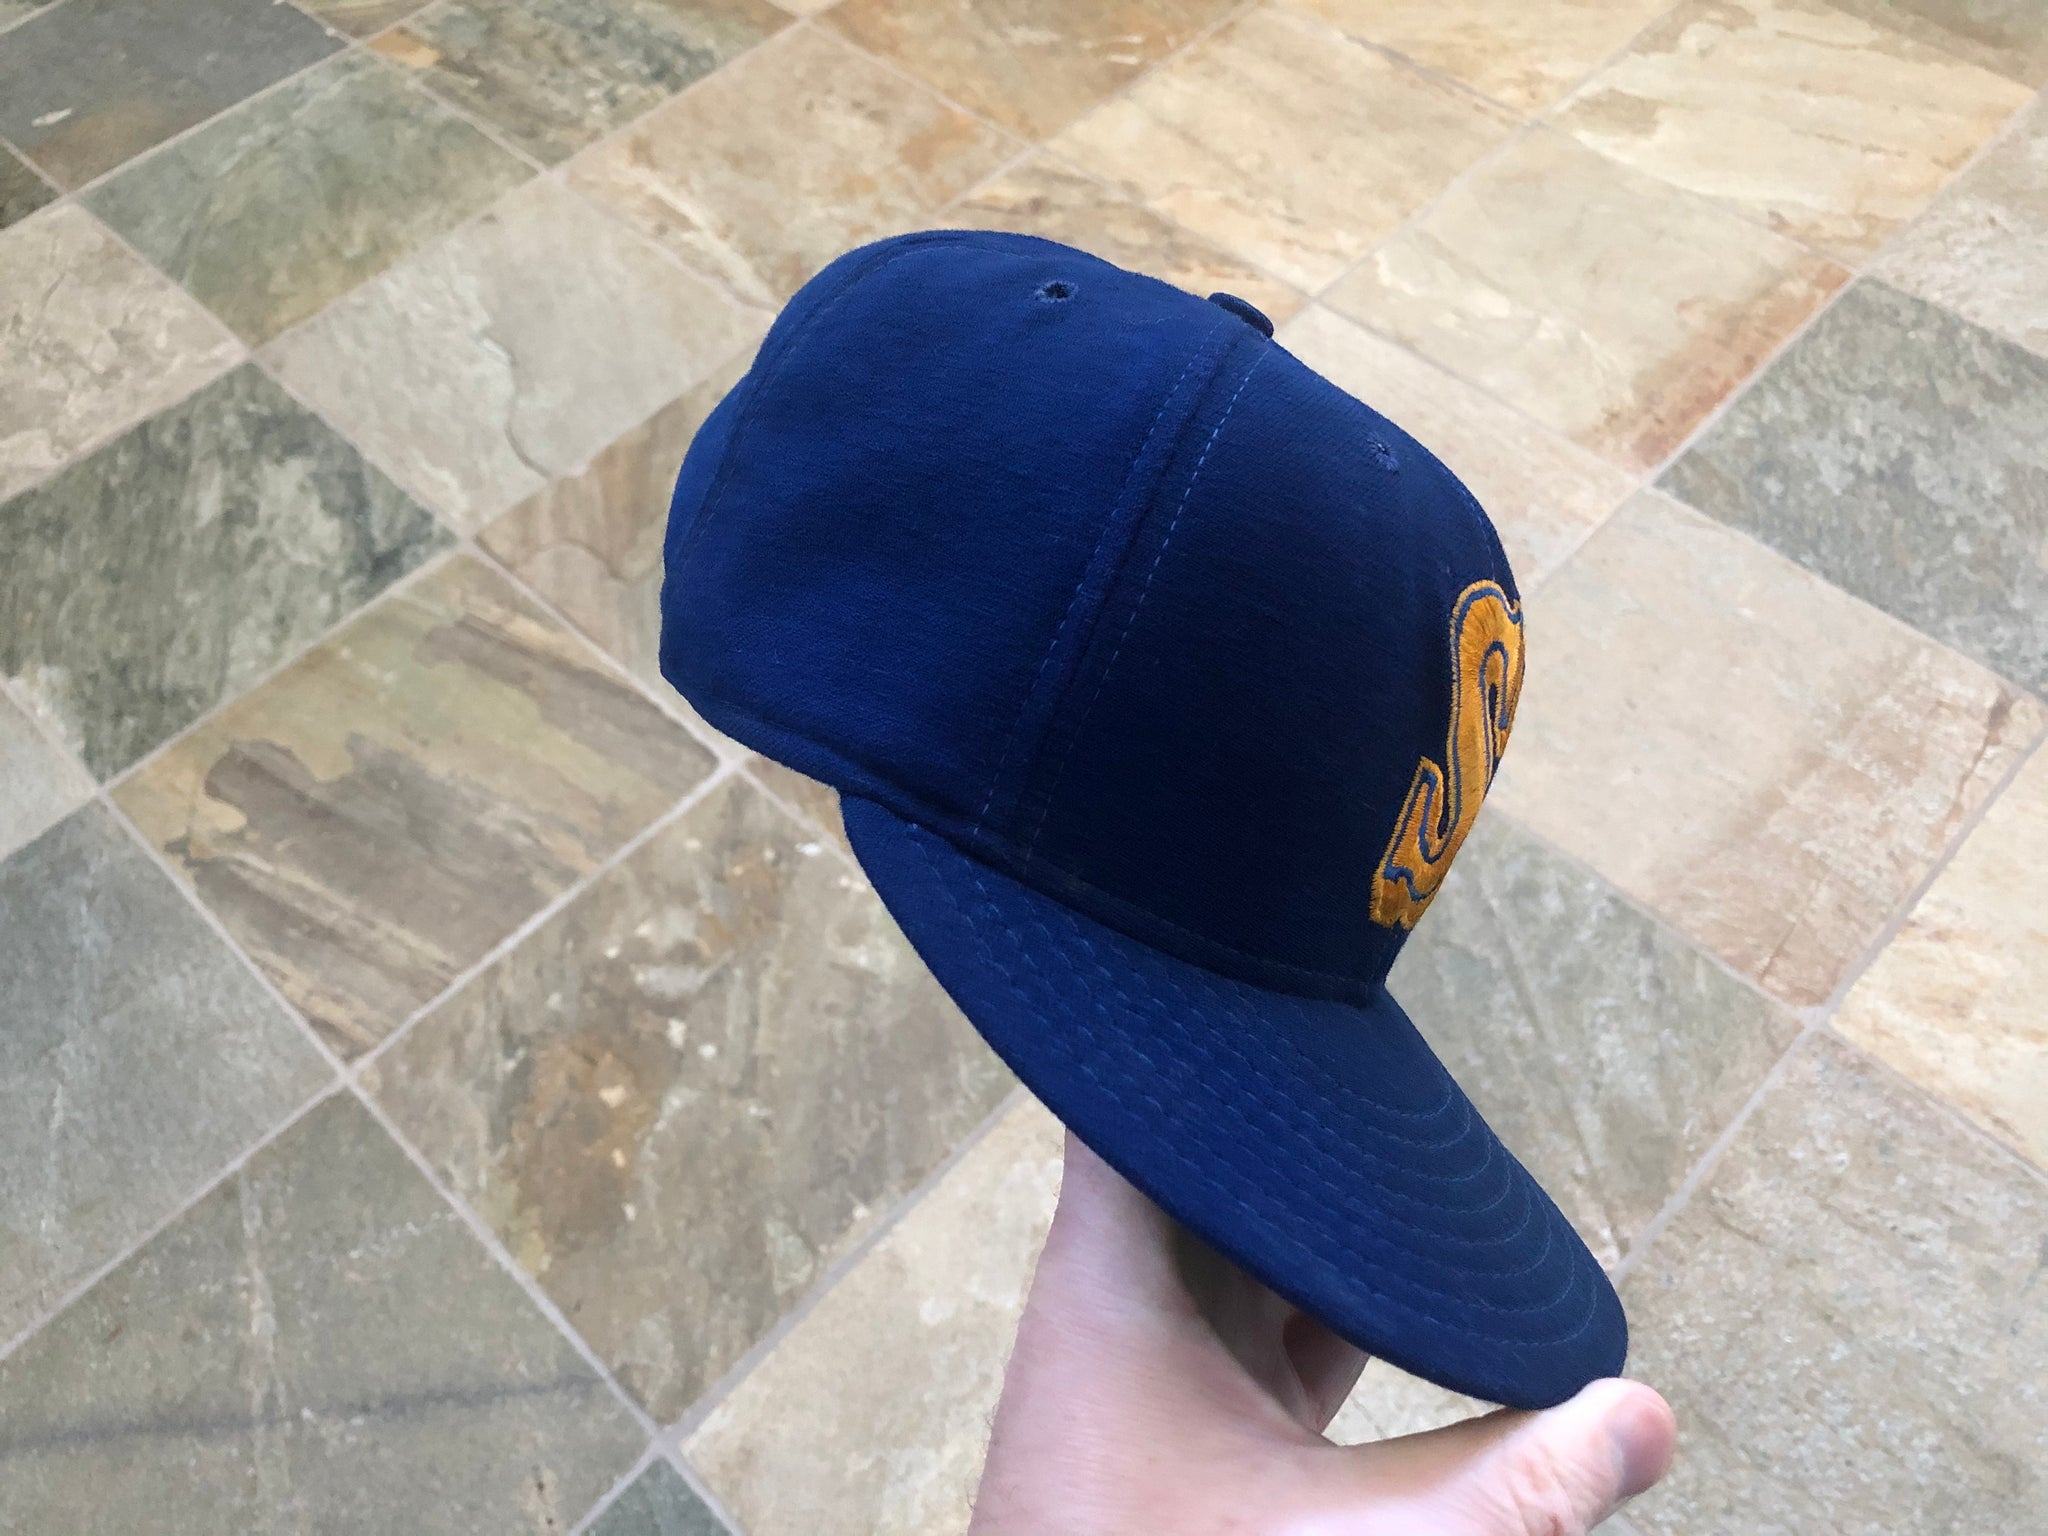 SEATTLE MARINERS VINTAGE 1990'S DIAMOND COLLECTION NEW ERA FITTED ADUL -  Bucks County Baseball Co.